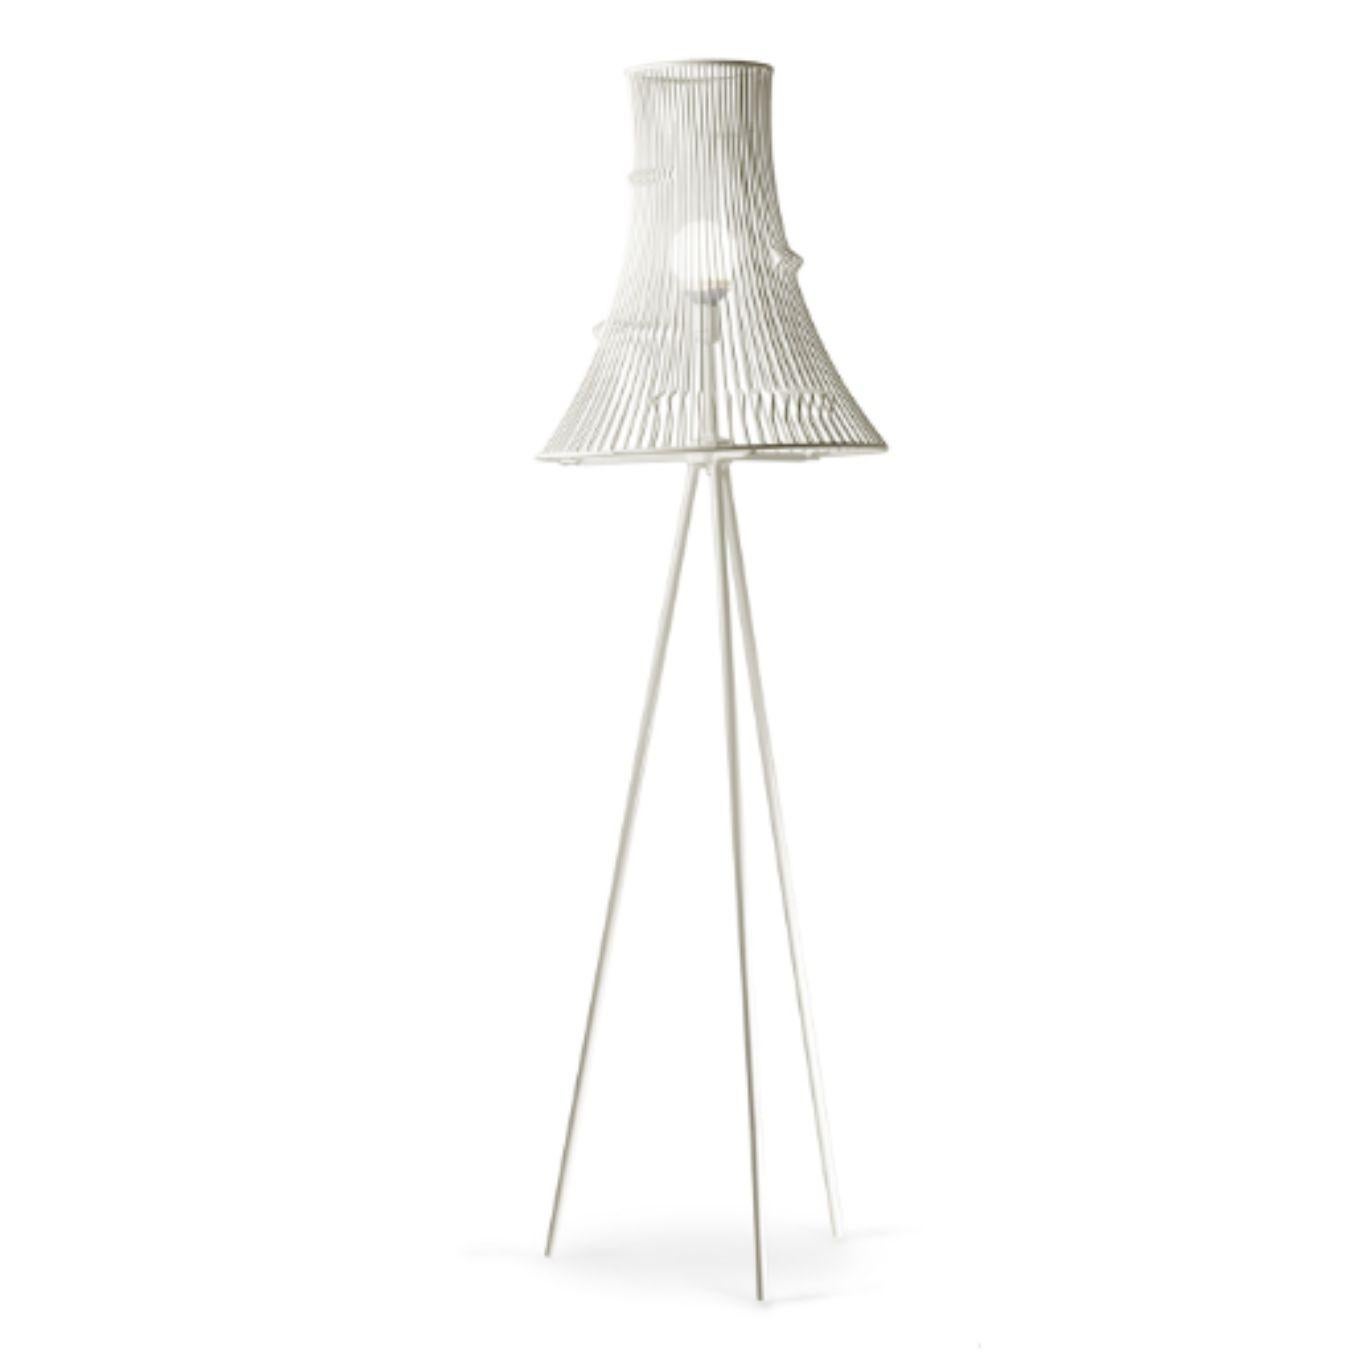 Ivory extrude floor lamp by Dooq.
Dimensions: W 50 x D 50 x H 175 cm.
Materials: lacquered metal, polished or brushed metal.
Also available in different colors and materials. 

Information:
230V/50Hz
E27/1x20W LED
120V/60Hz
E26/1x15W LED
bulb not